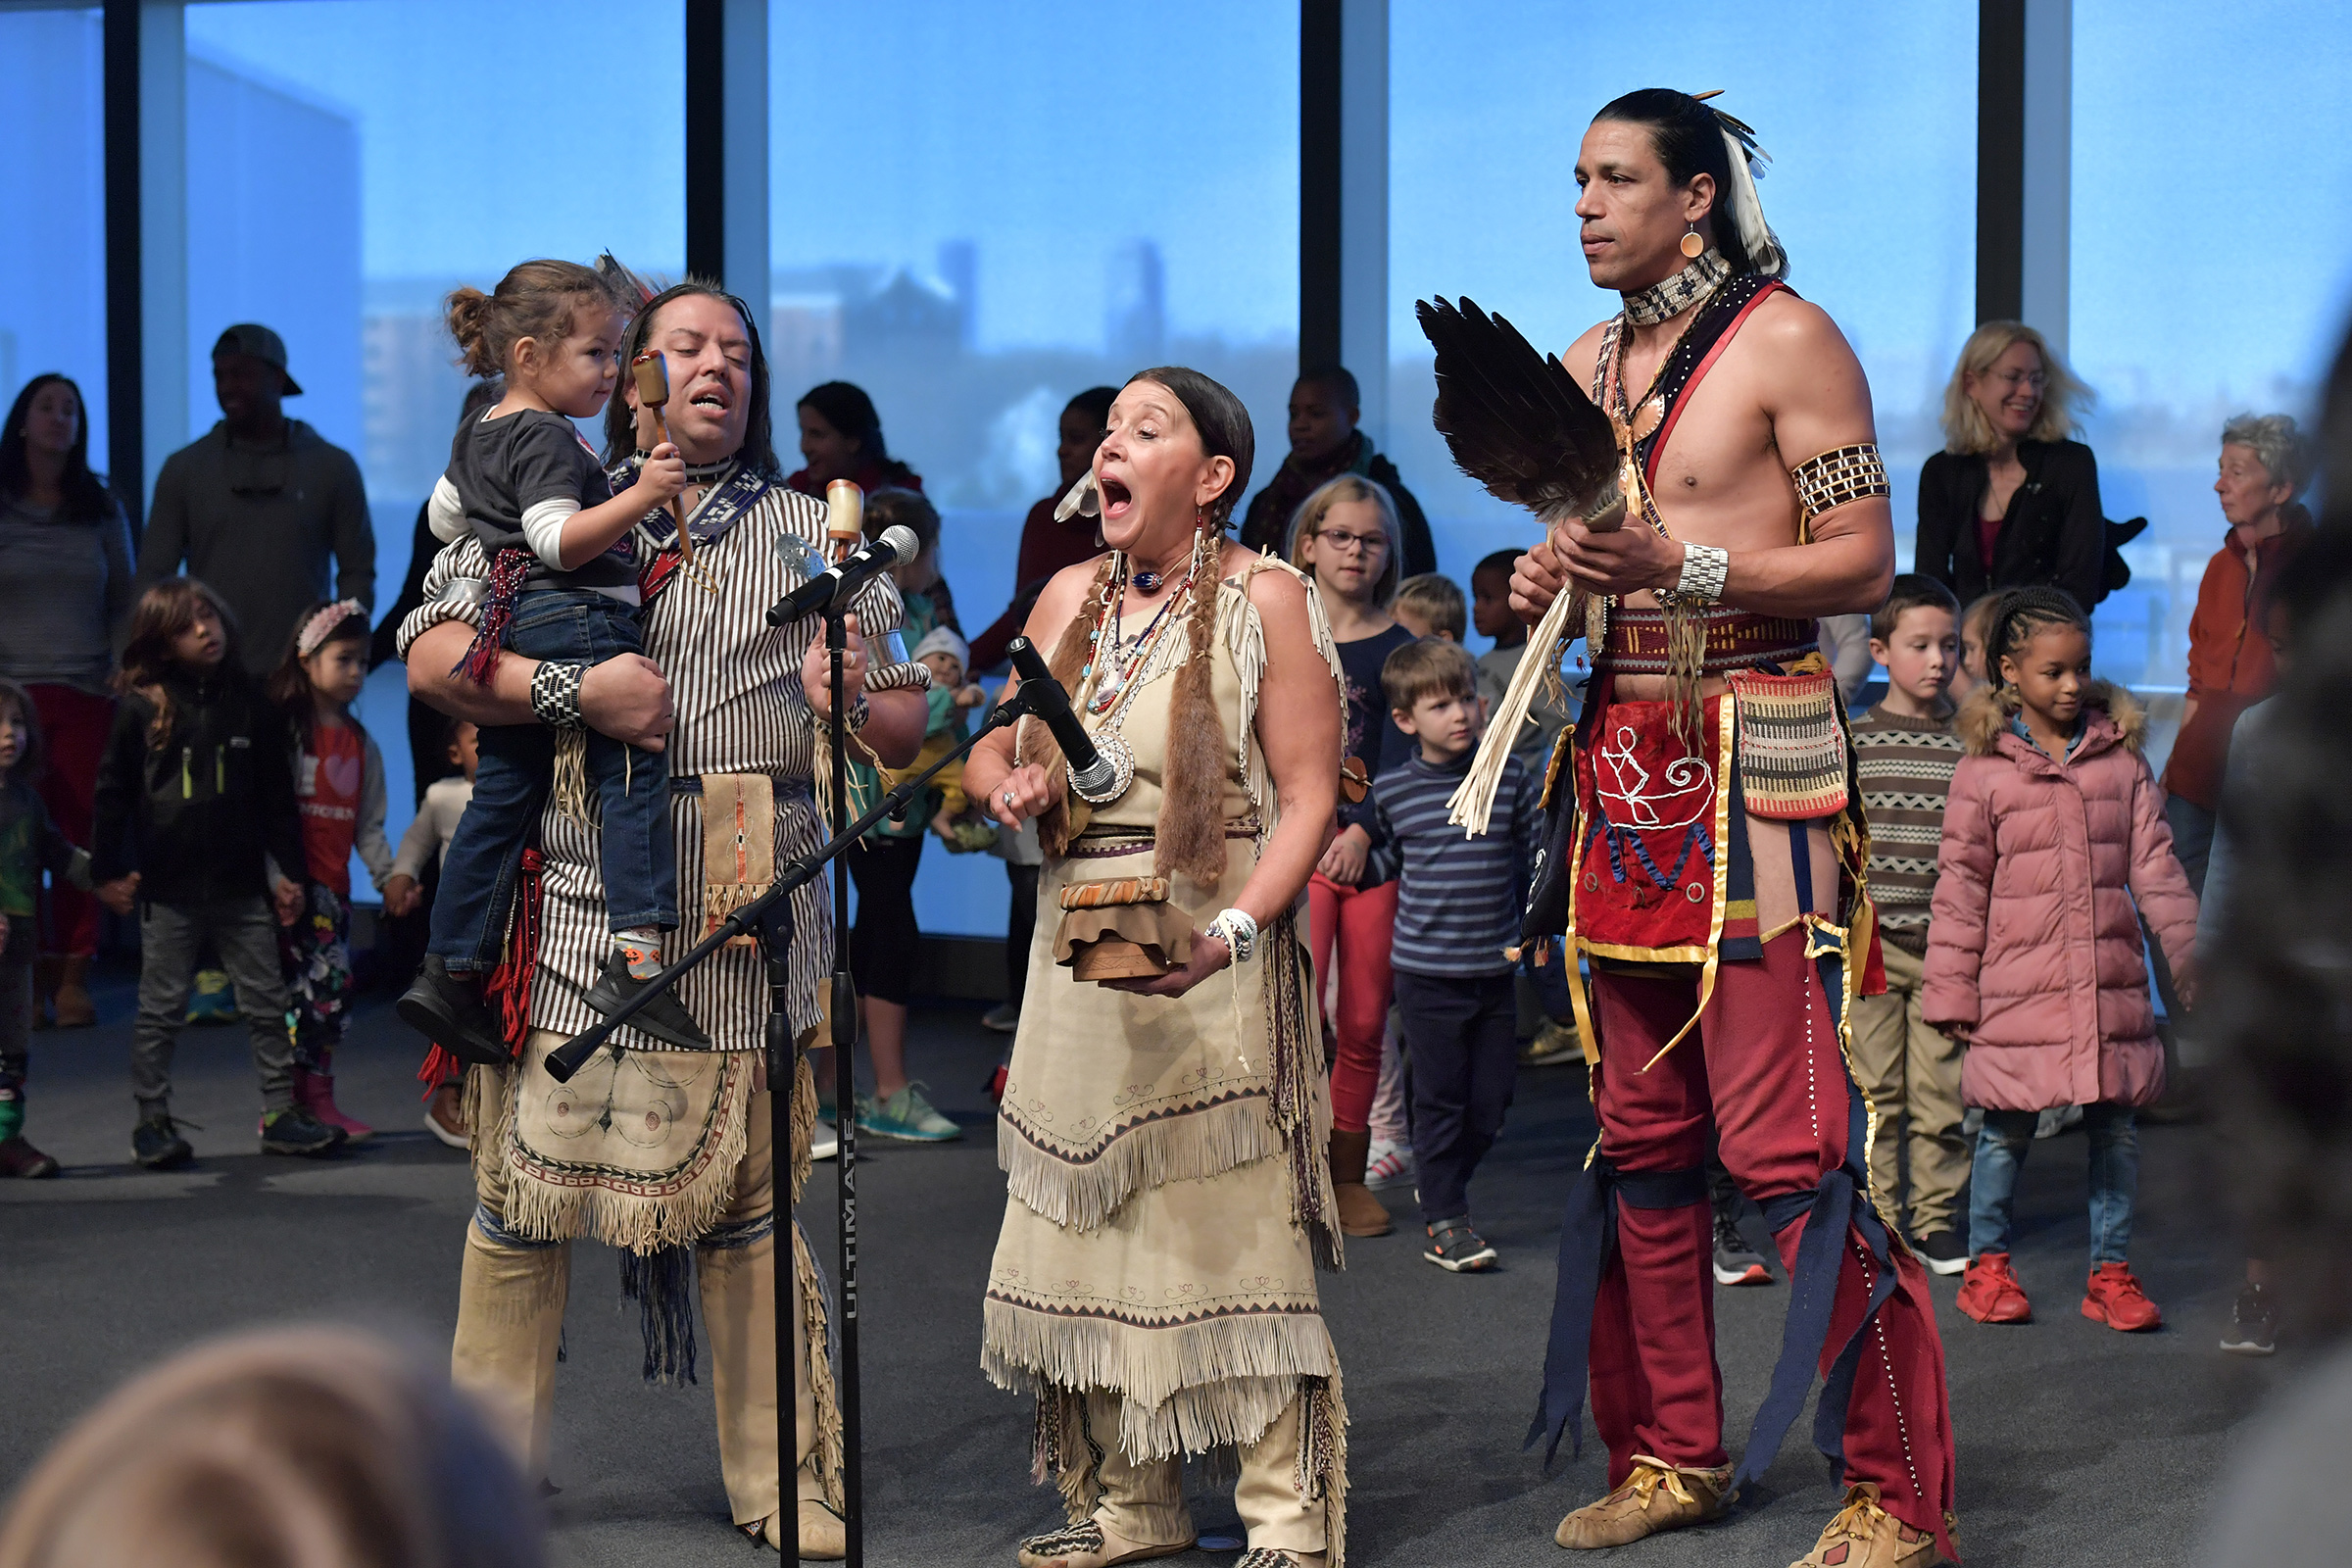 The Wampanoag Nation Singers and Dancers, including Jonathan James-Perry (L) and Kitty Hendricks Miller (C) perform at the John F. Kennedy Presidential Library and Museum on Nov. 29, 2019 in Boston to commemorate Native American Heritage Month